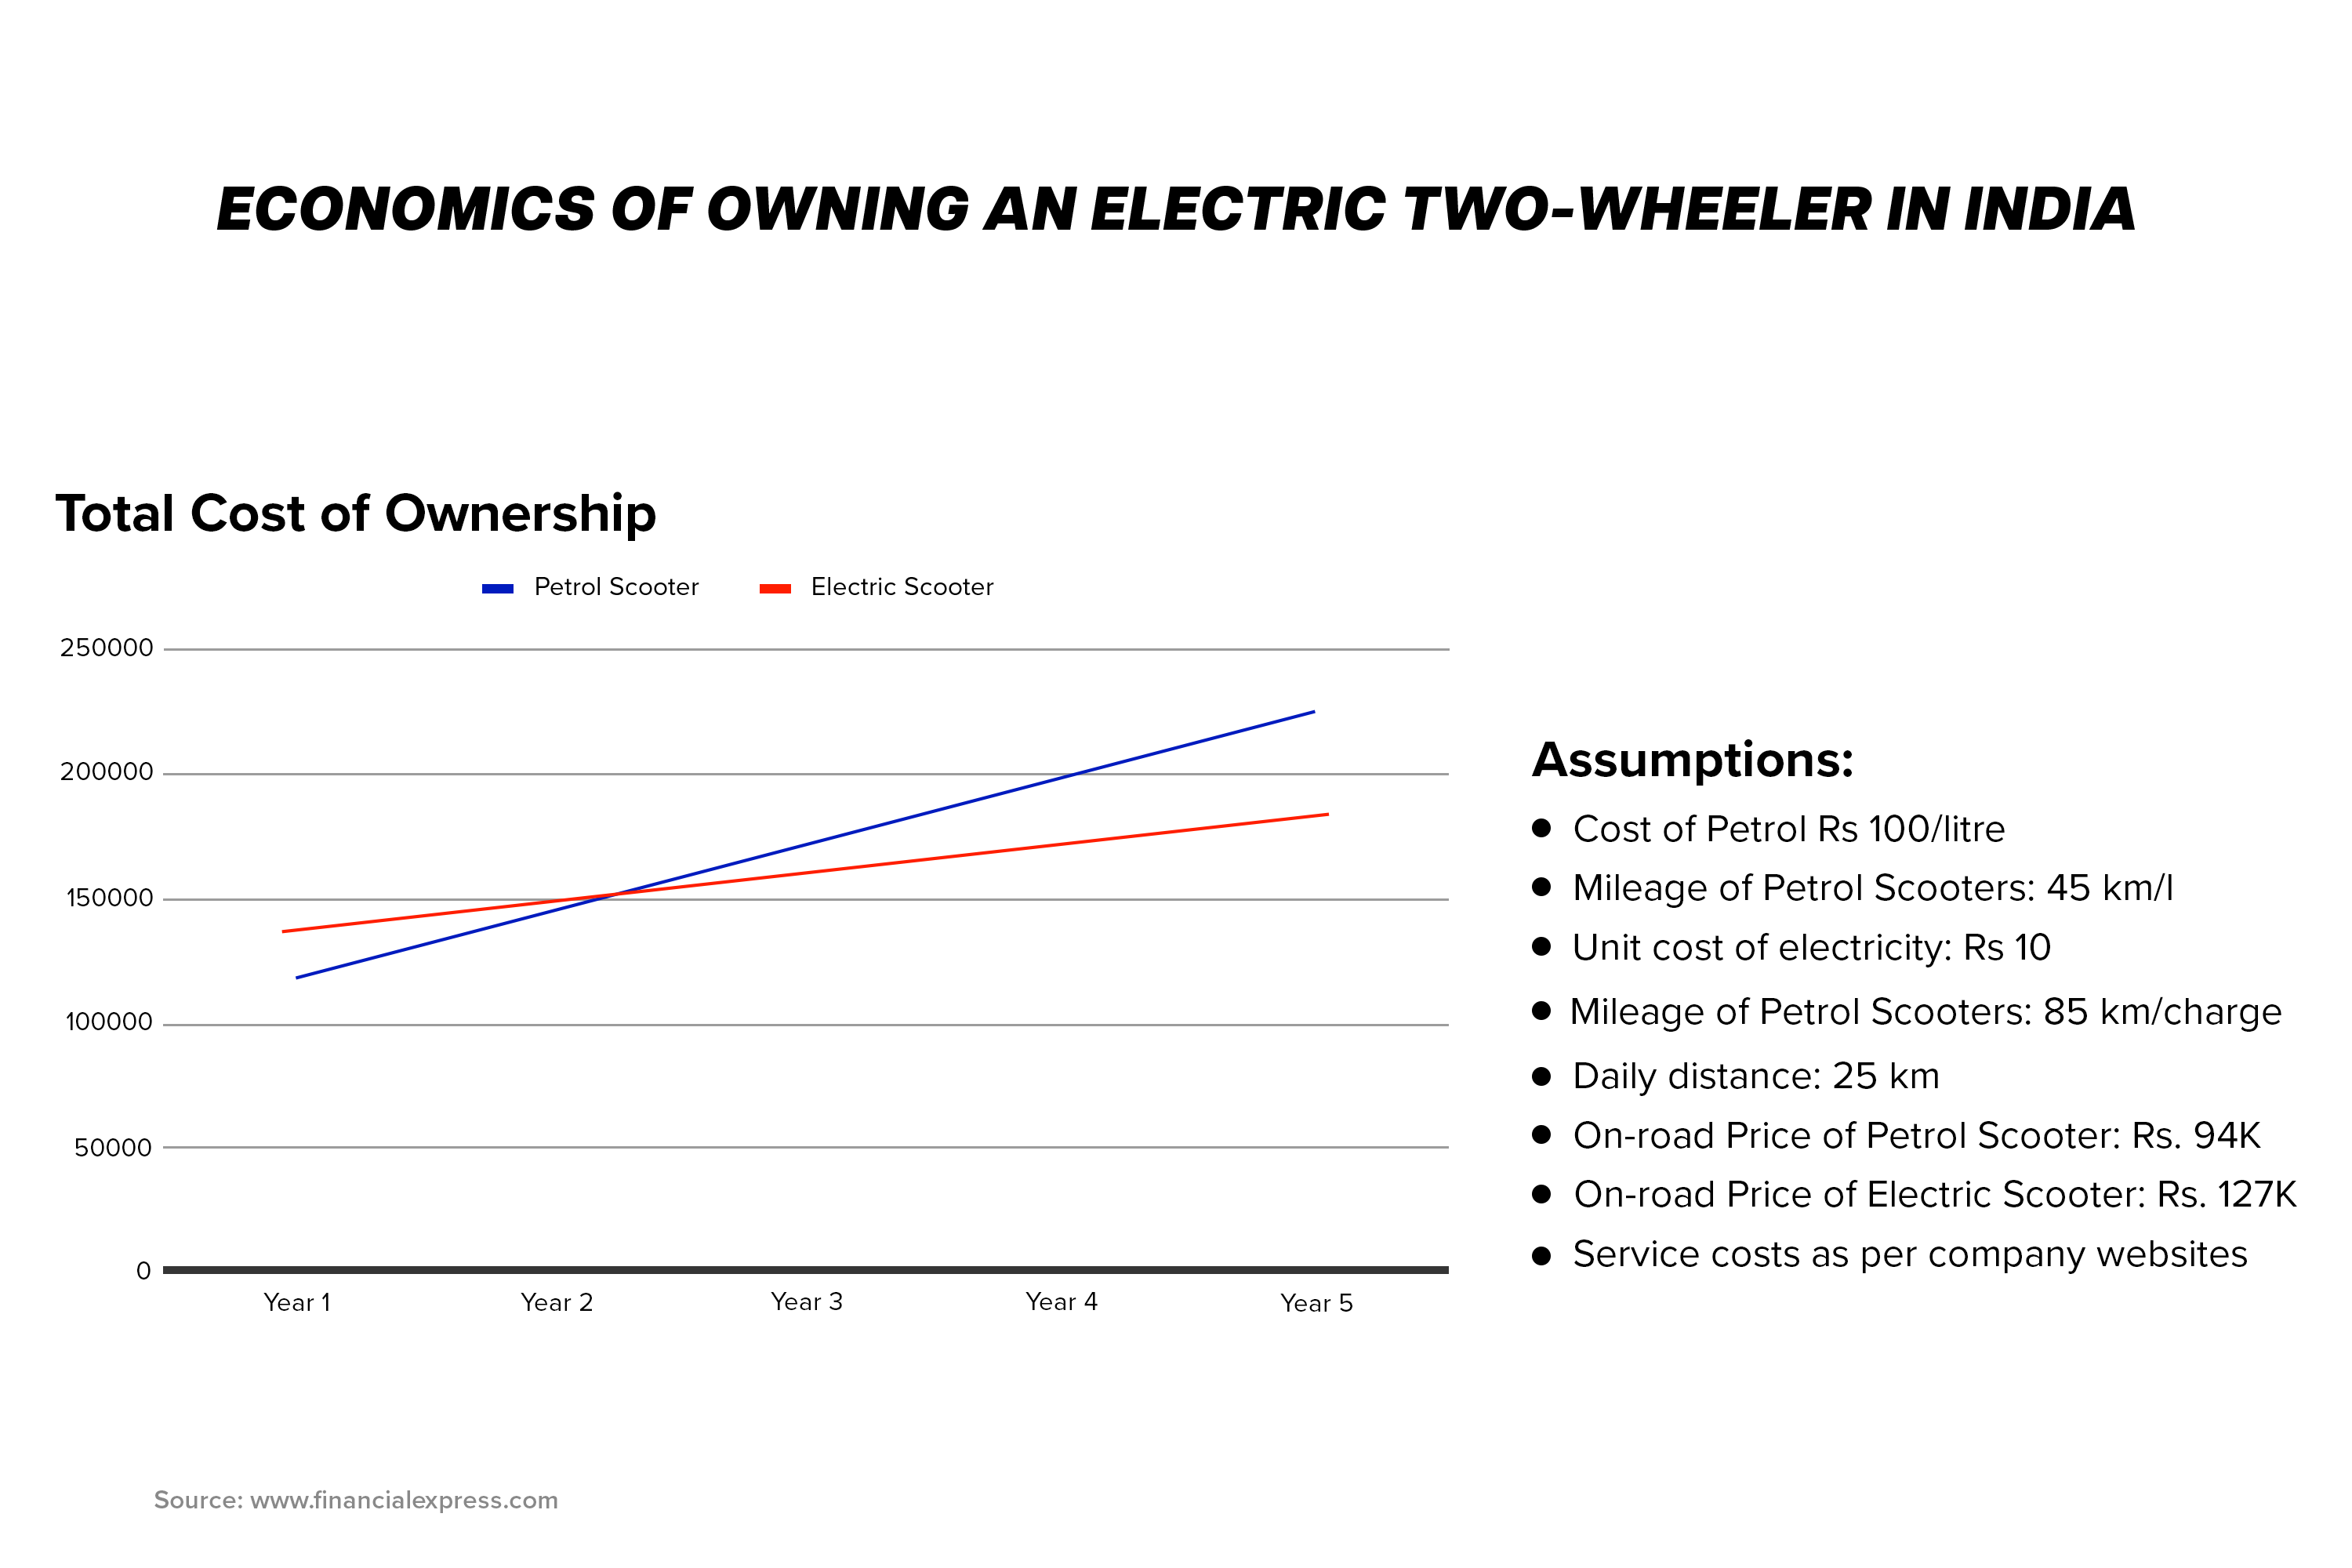 The Cost of Owning an Electric Scooter in India